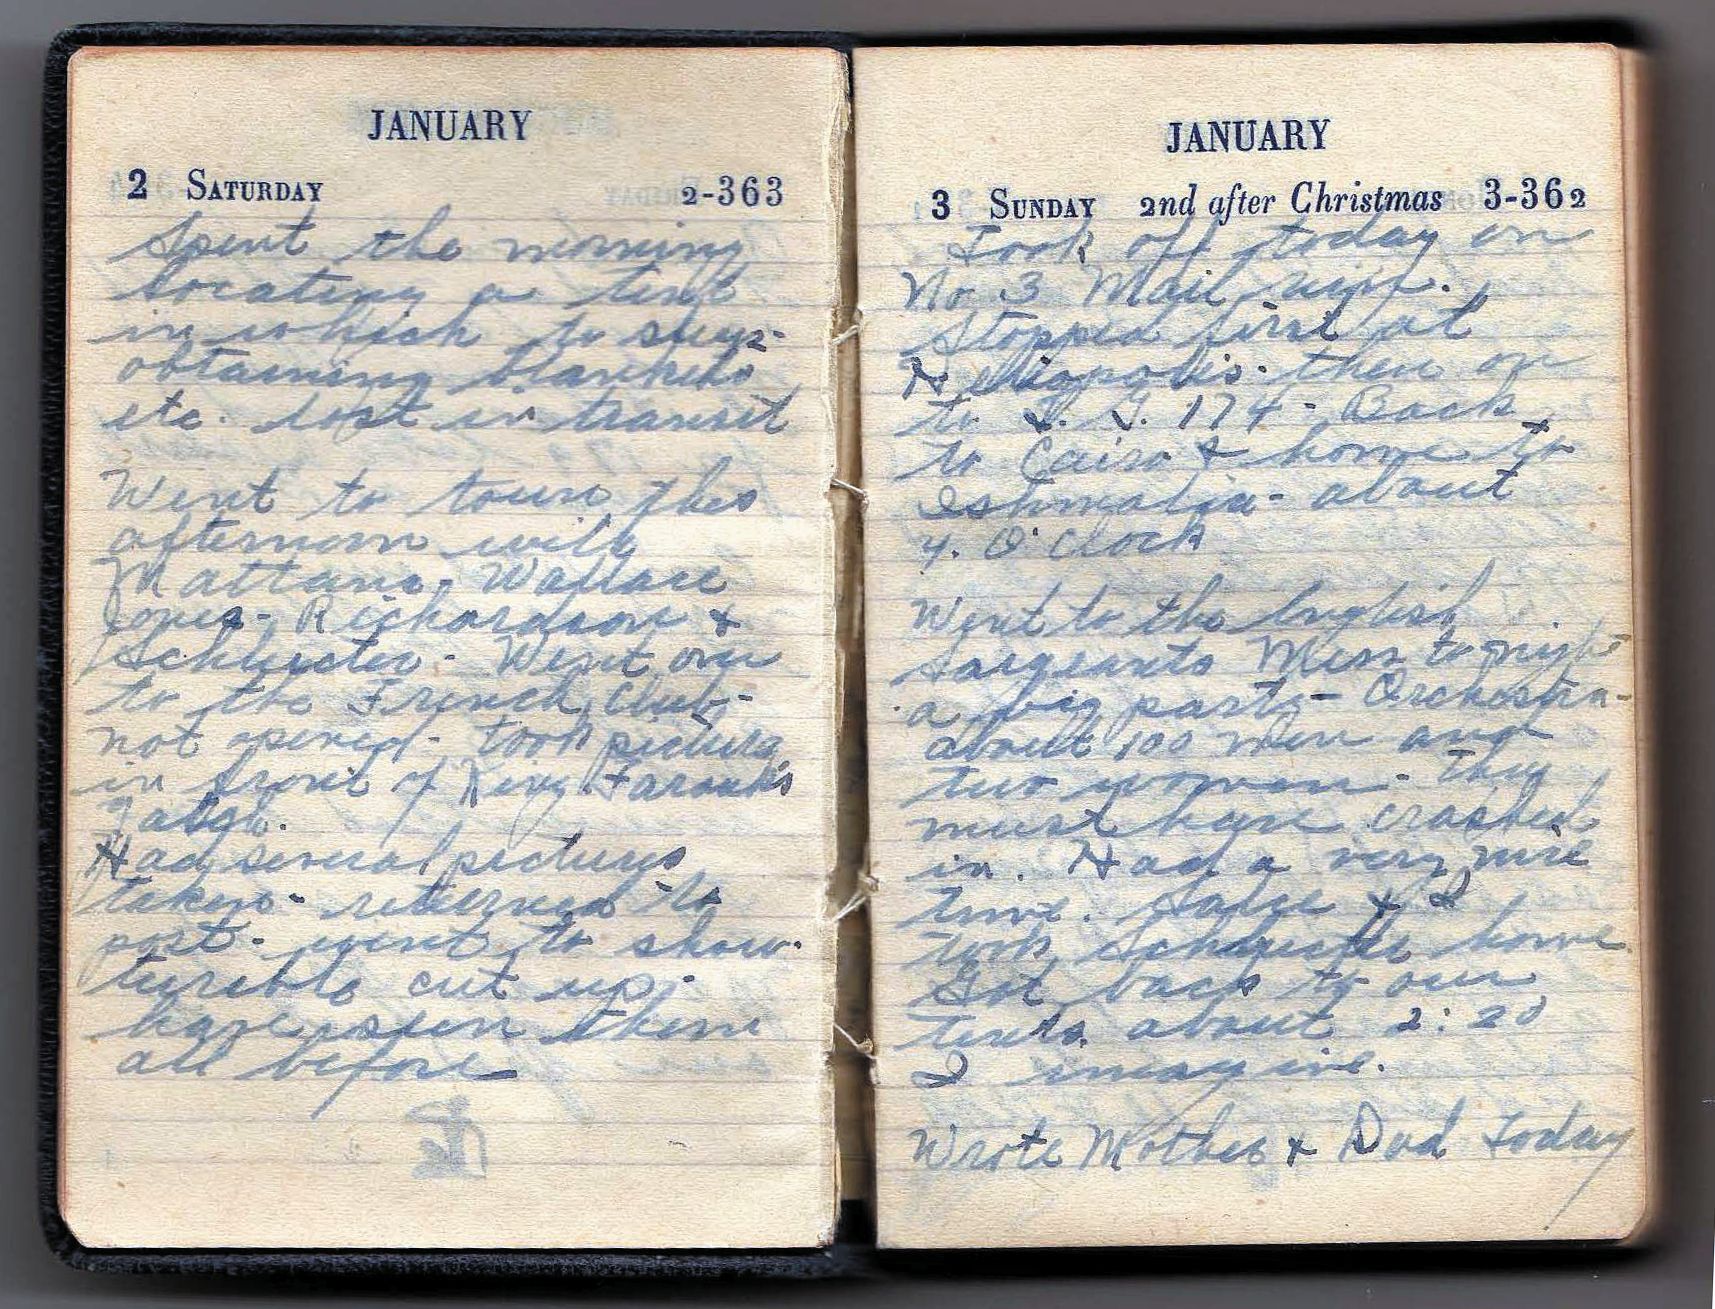 The yellowed pages of Corporal James G. Delaney’s journal entries for January 2-3, 1943, remain legible and provide a glimpse into the life of an airman during World War II.